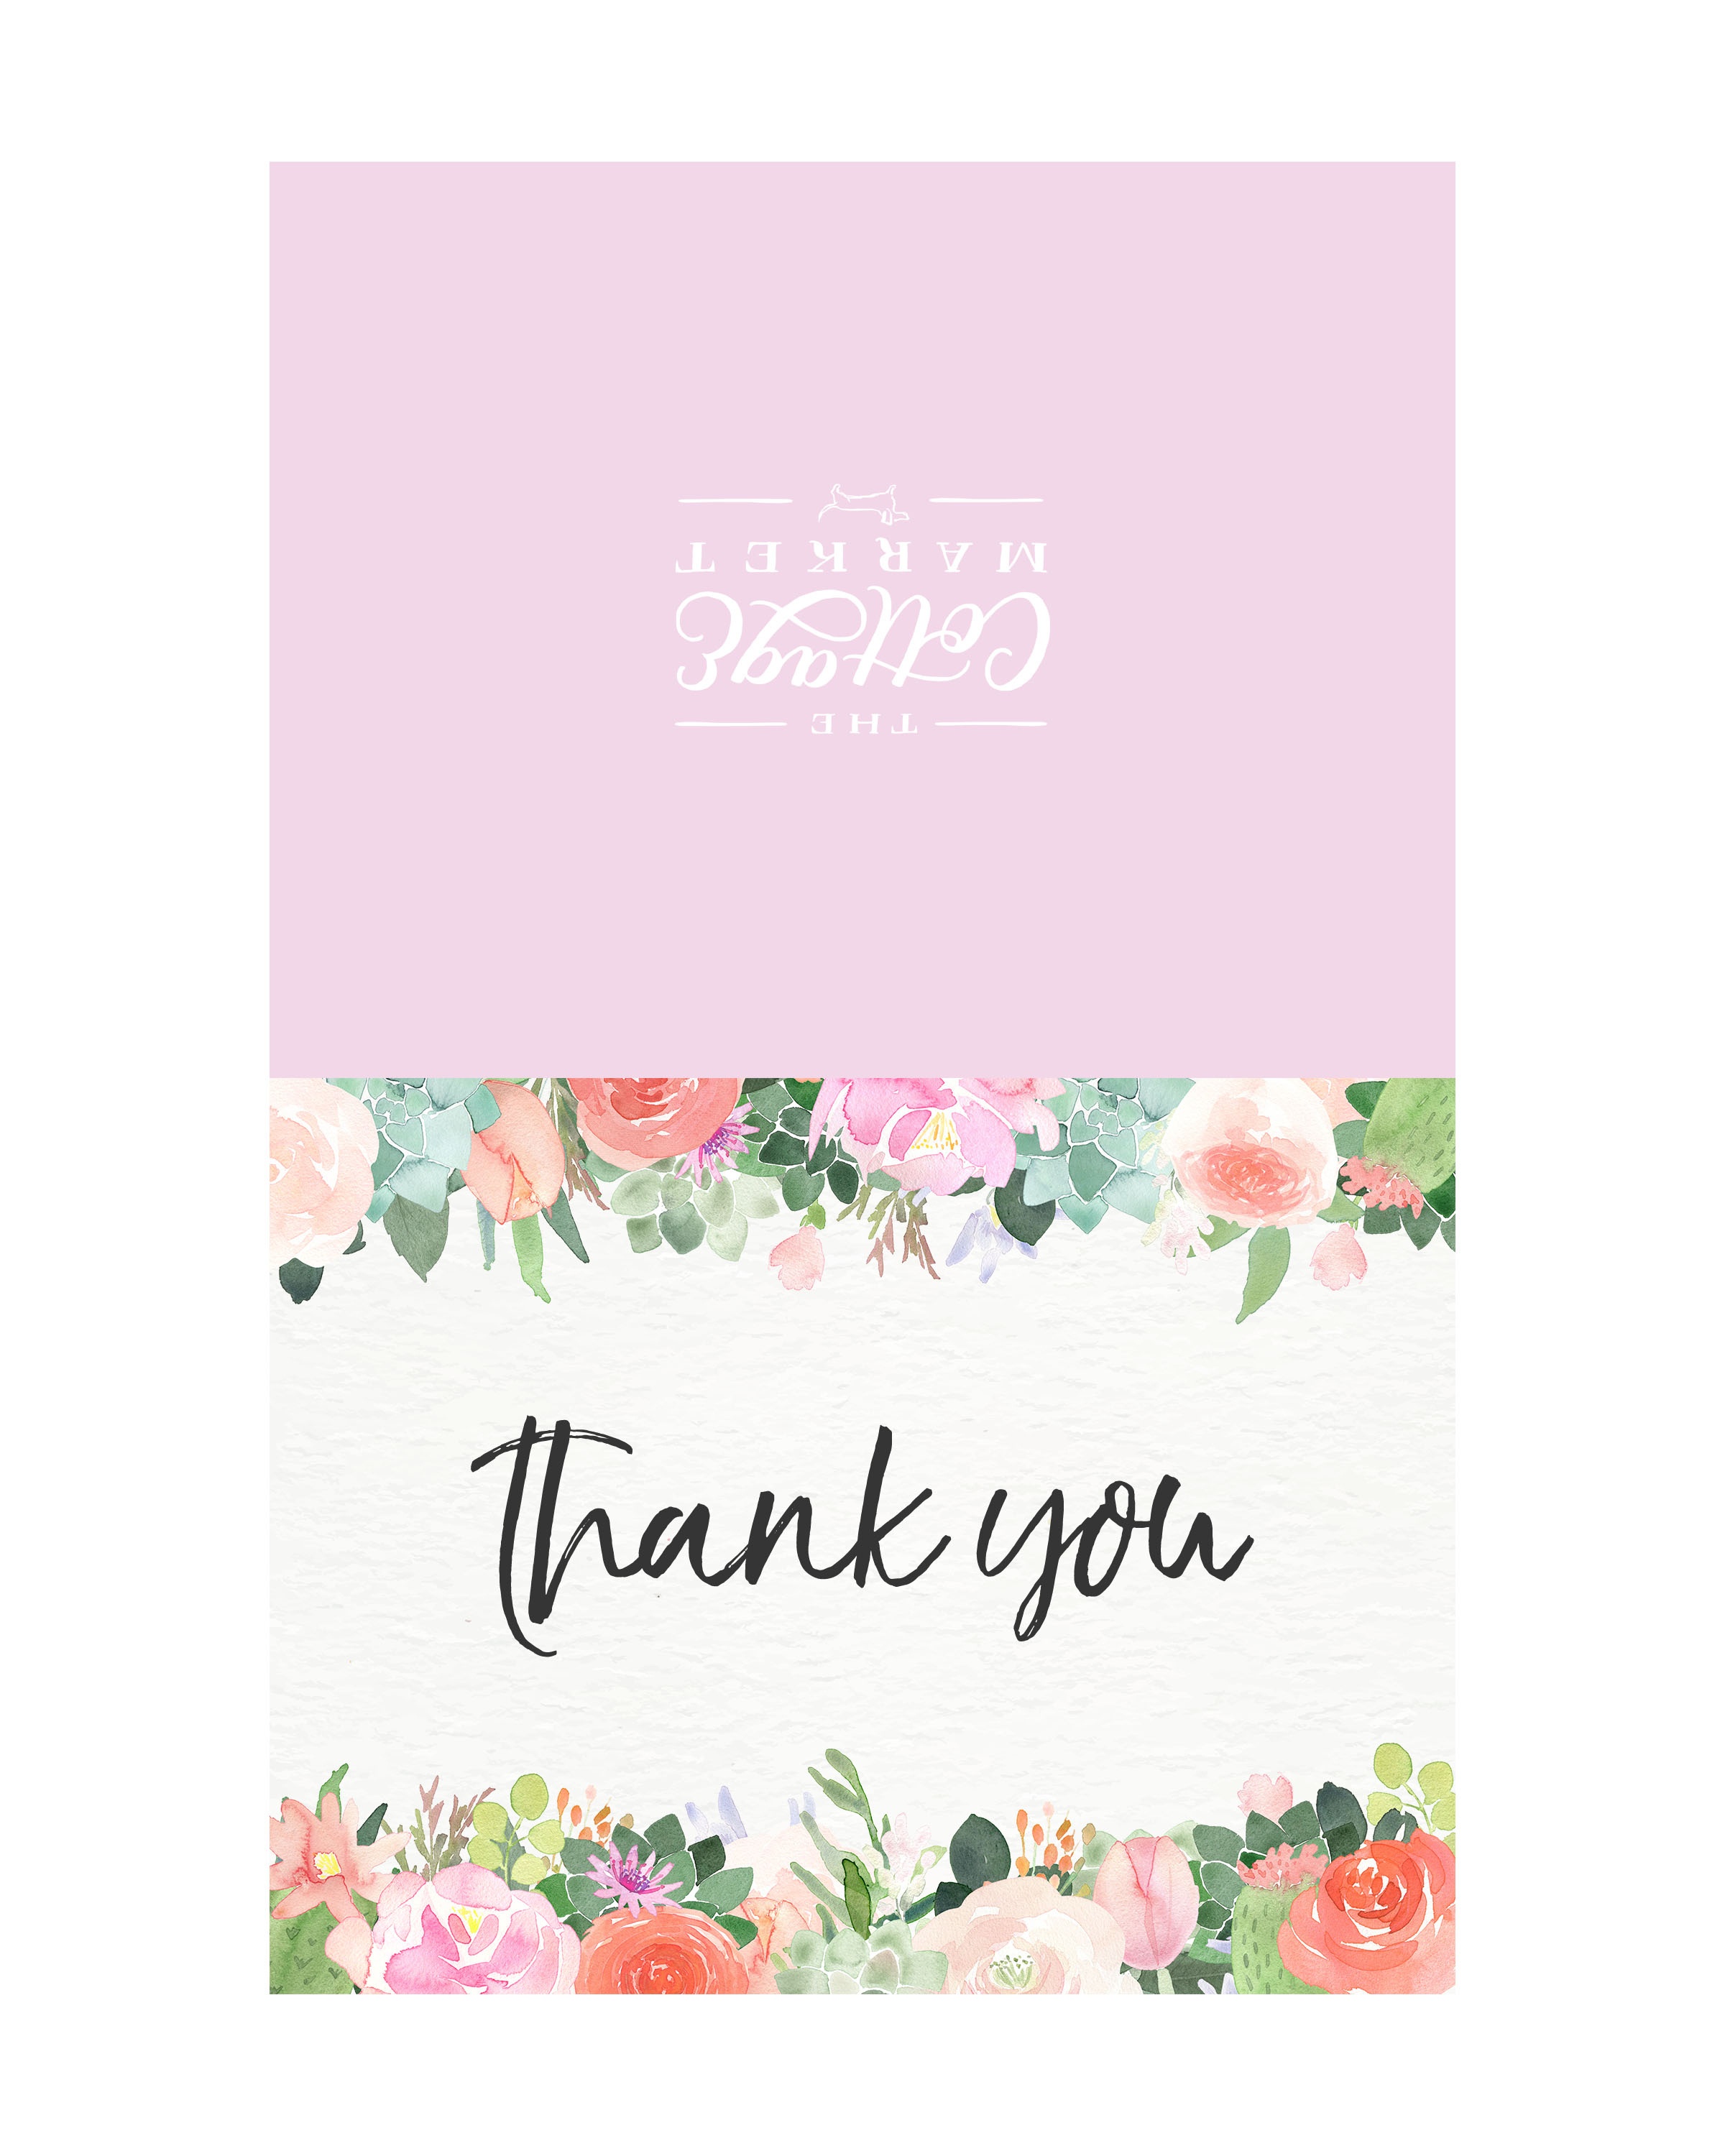 10 Free Printable Thank You Cards You Can&amp;#039;t Miss - The Cottage Market - Free Printable Thank You Cards